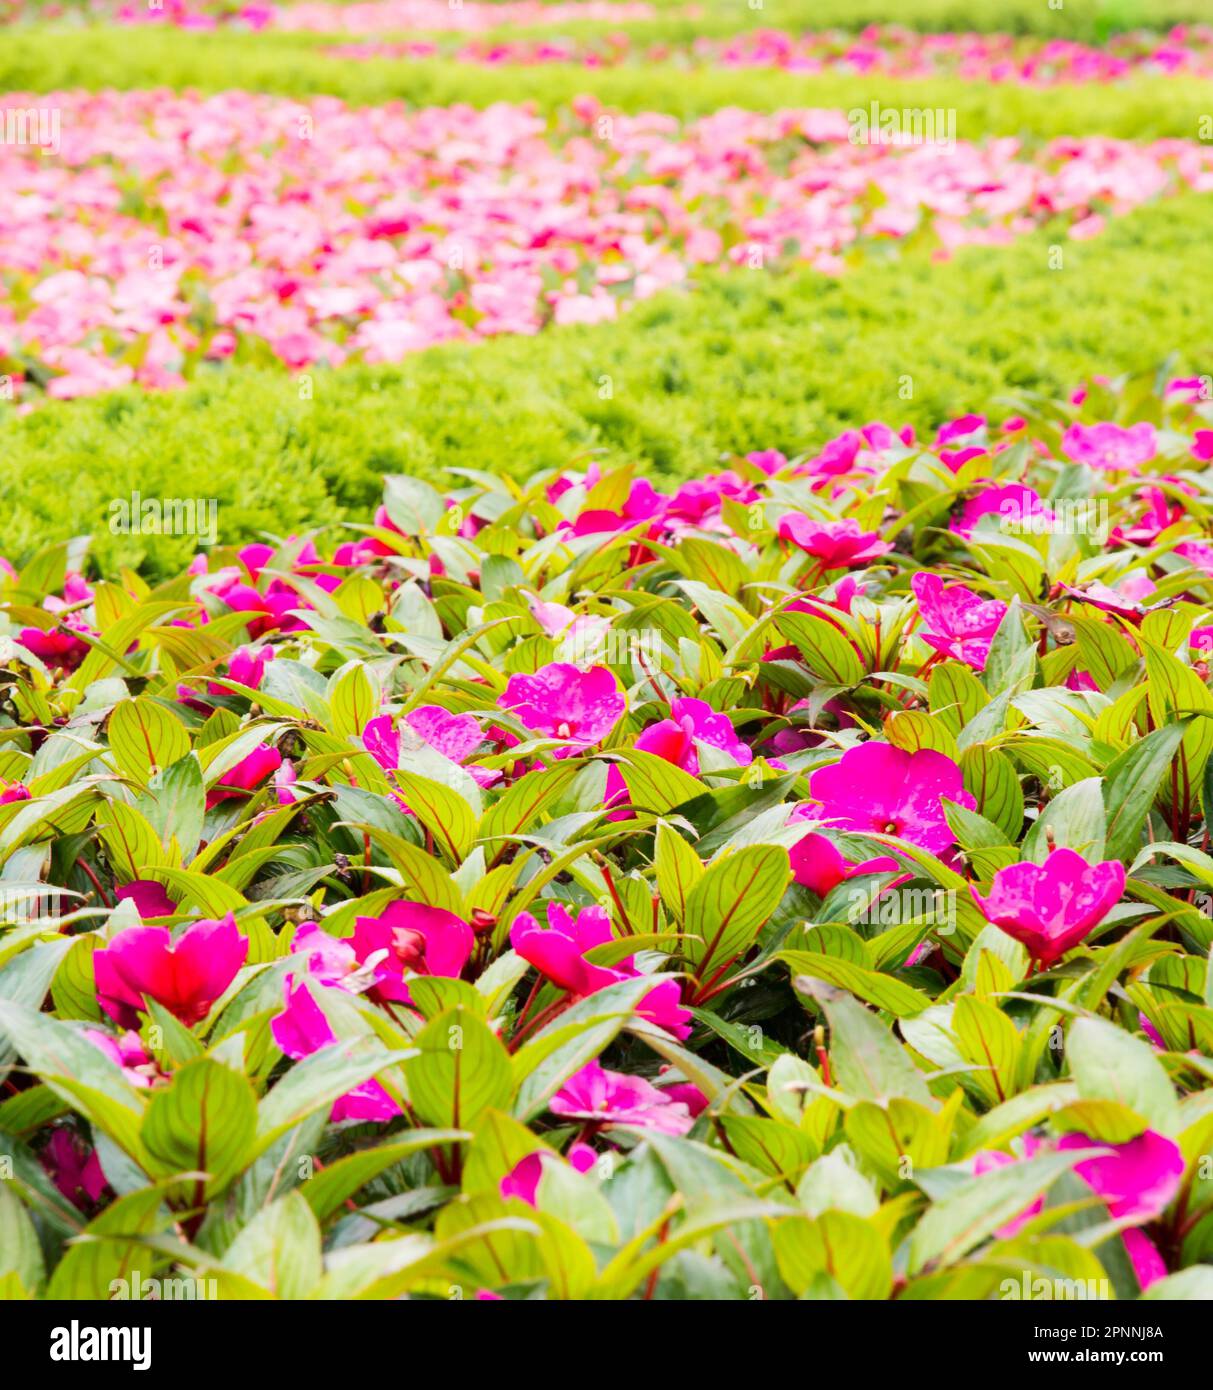 Flower bed with shallow depth of field Stock Photo